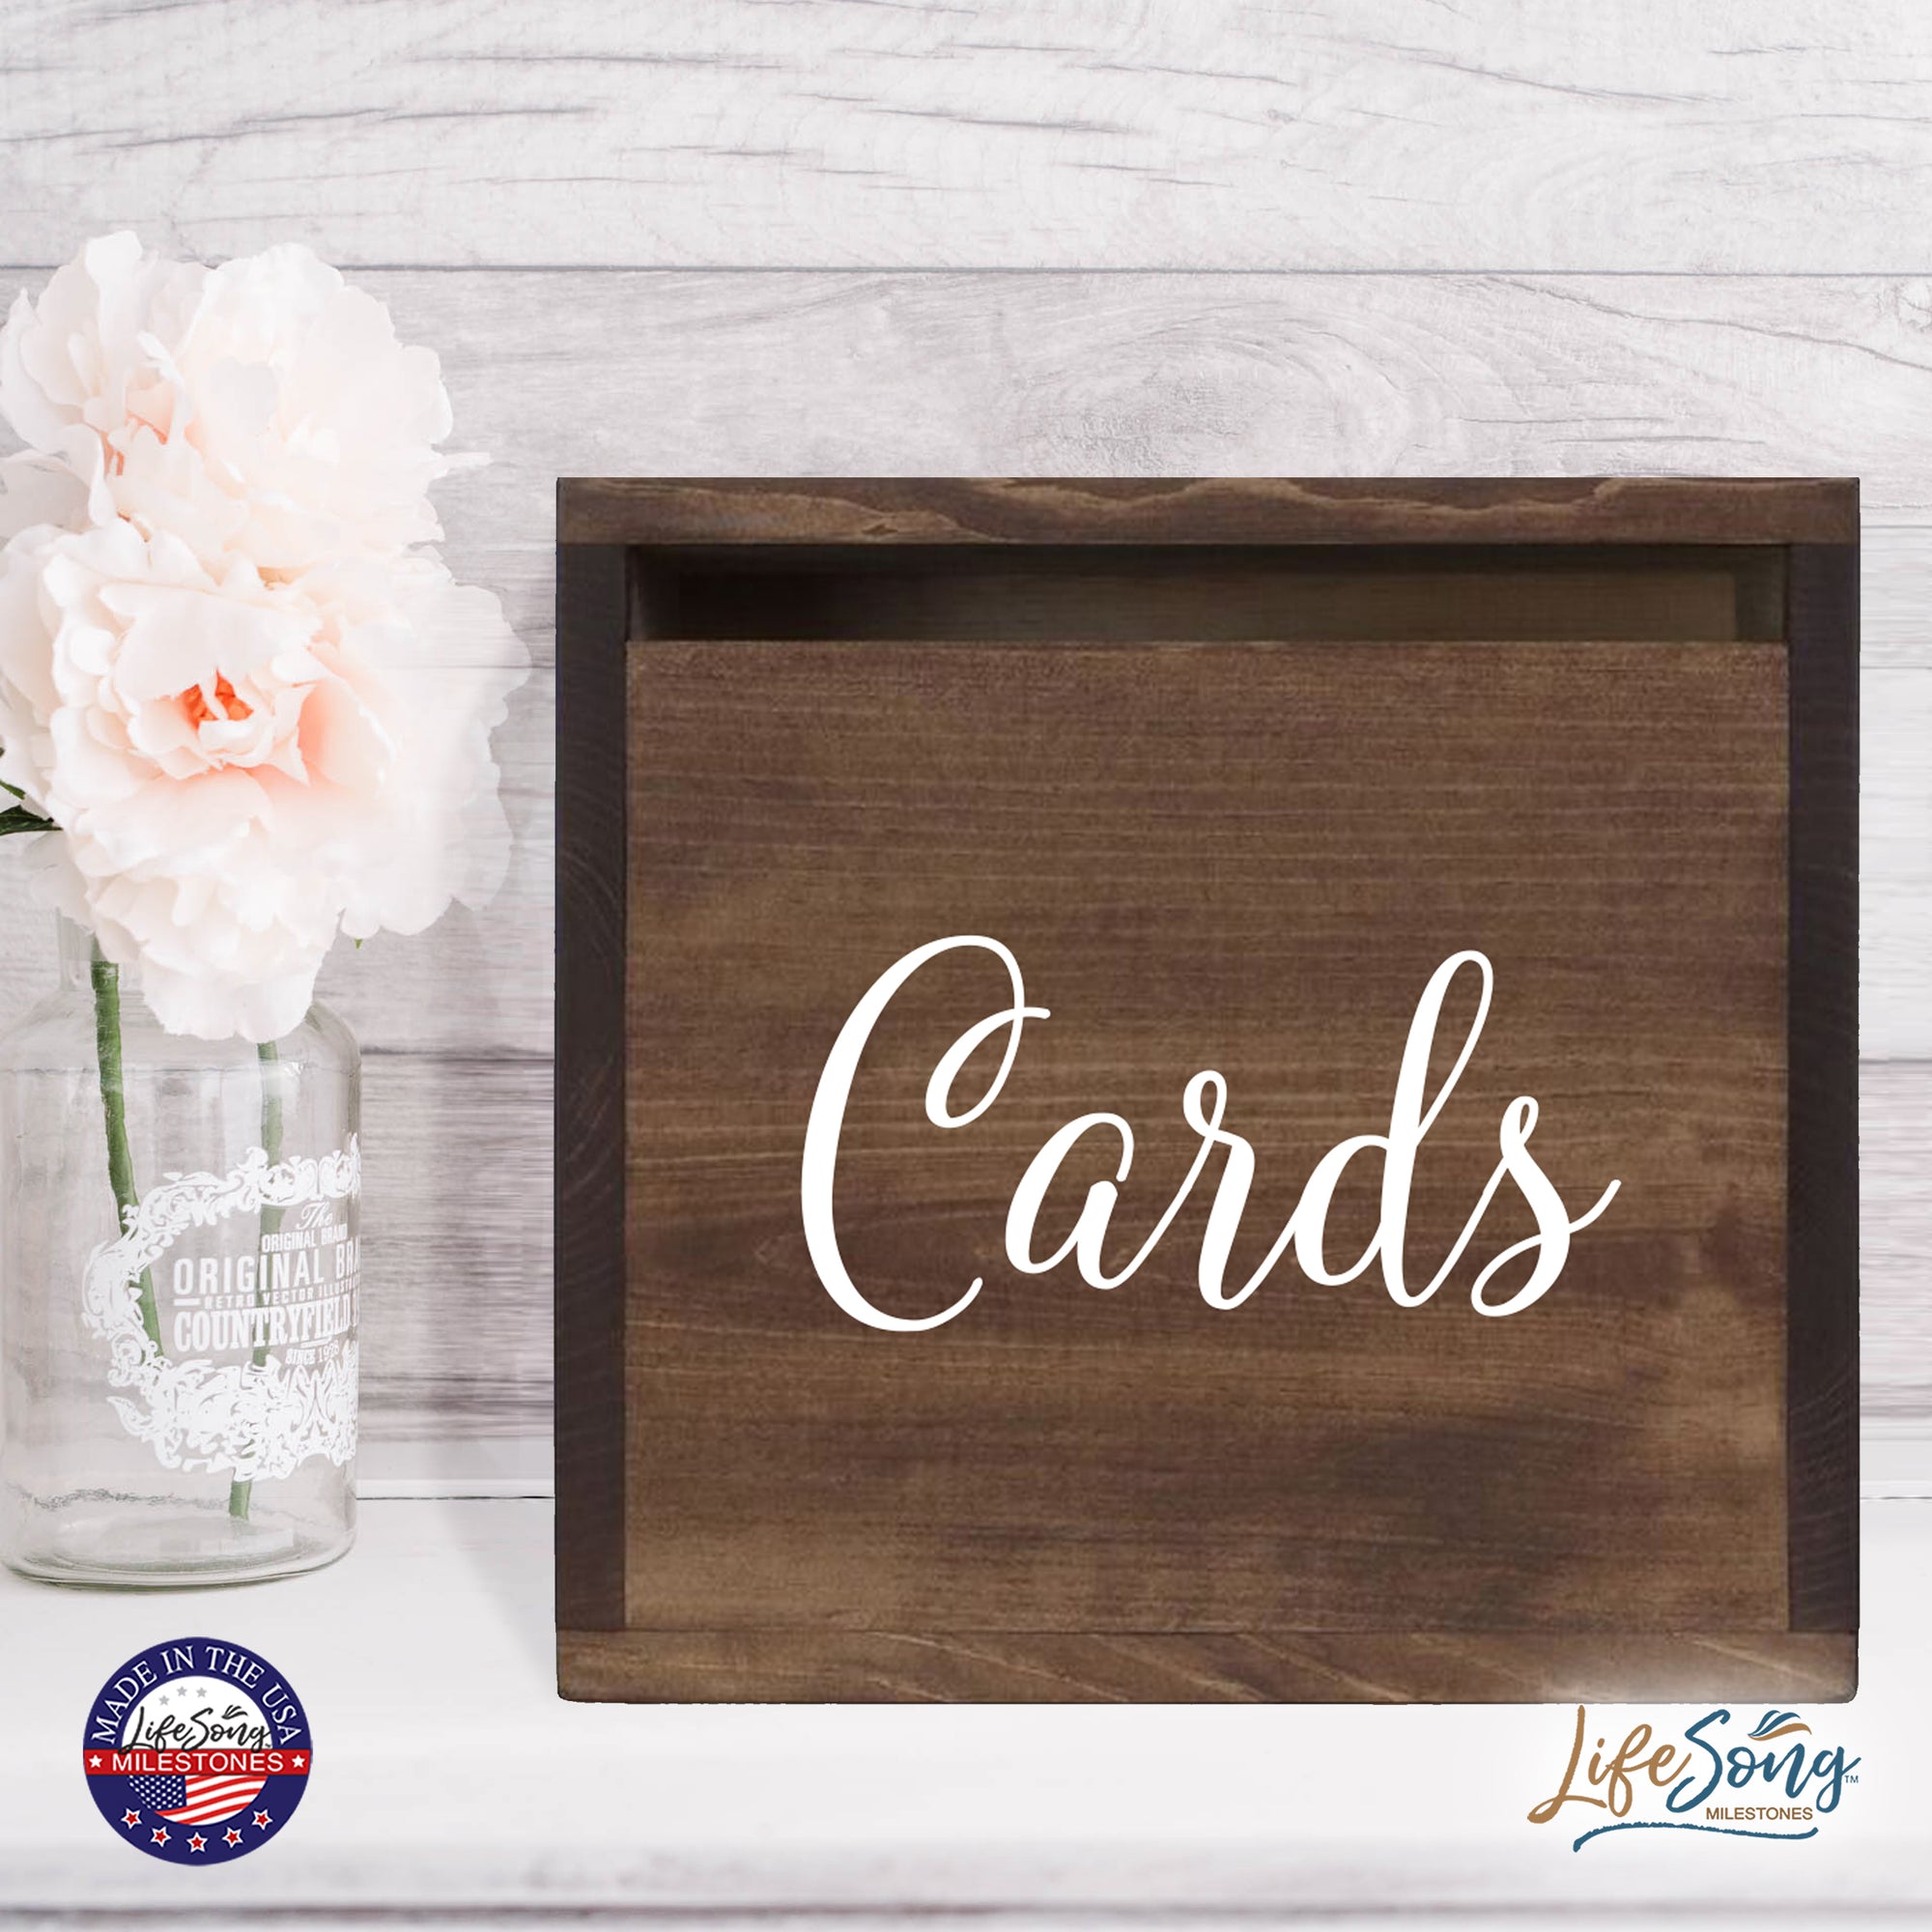 Wooden Card Box for Wedding Ceremonies, Venues, Receptions, Bridal Showers, and Engagement Parties 13.5x12 - Wedding Card Box